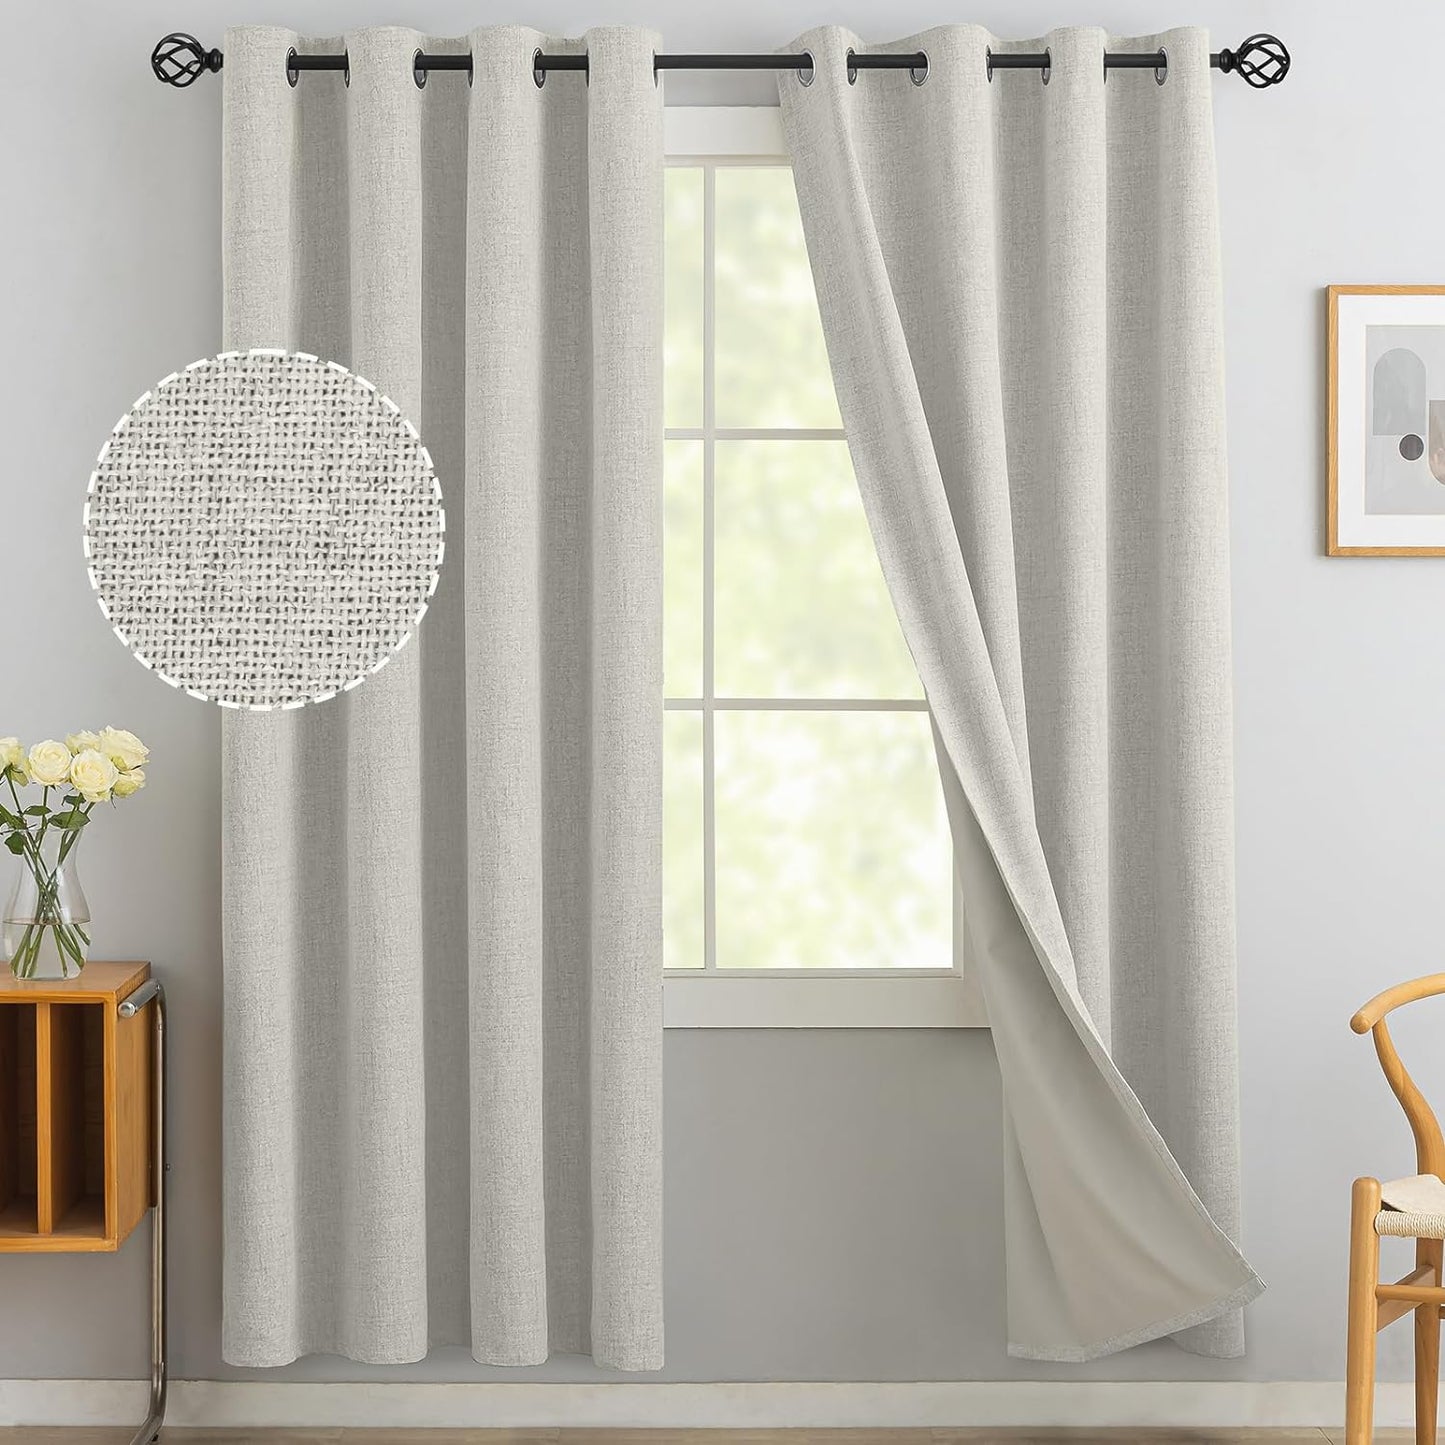 Yakamok Natural Linen Curtains 100% Blackout 84 Inches Long,Room Darkening Textured Curtains for Living Room Thermal Grommet Bedroom Curtains 2 Panels with Greyish White Liner  Yakamok Cream 52W X 72L / 2 Panels 